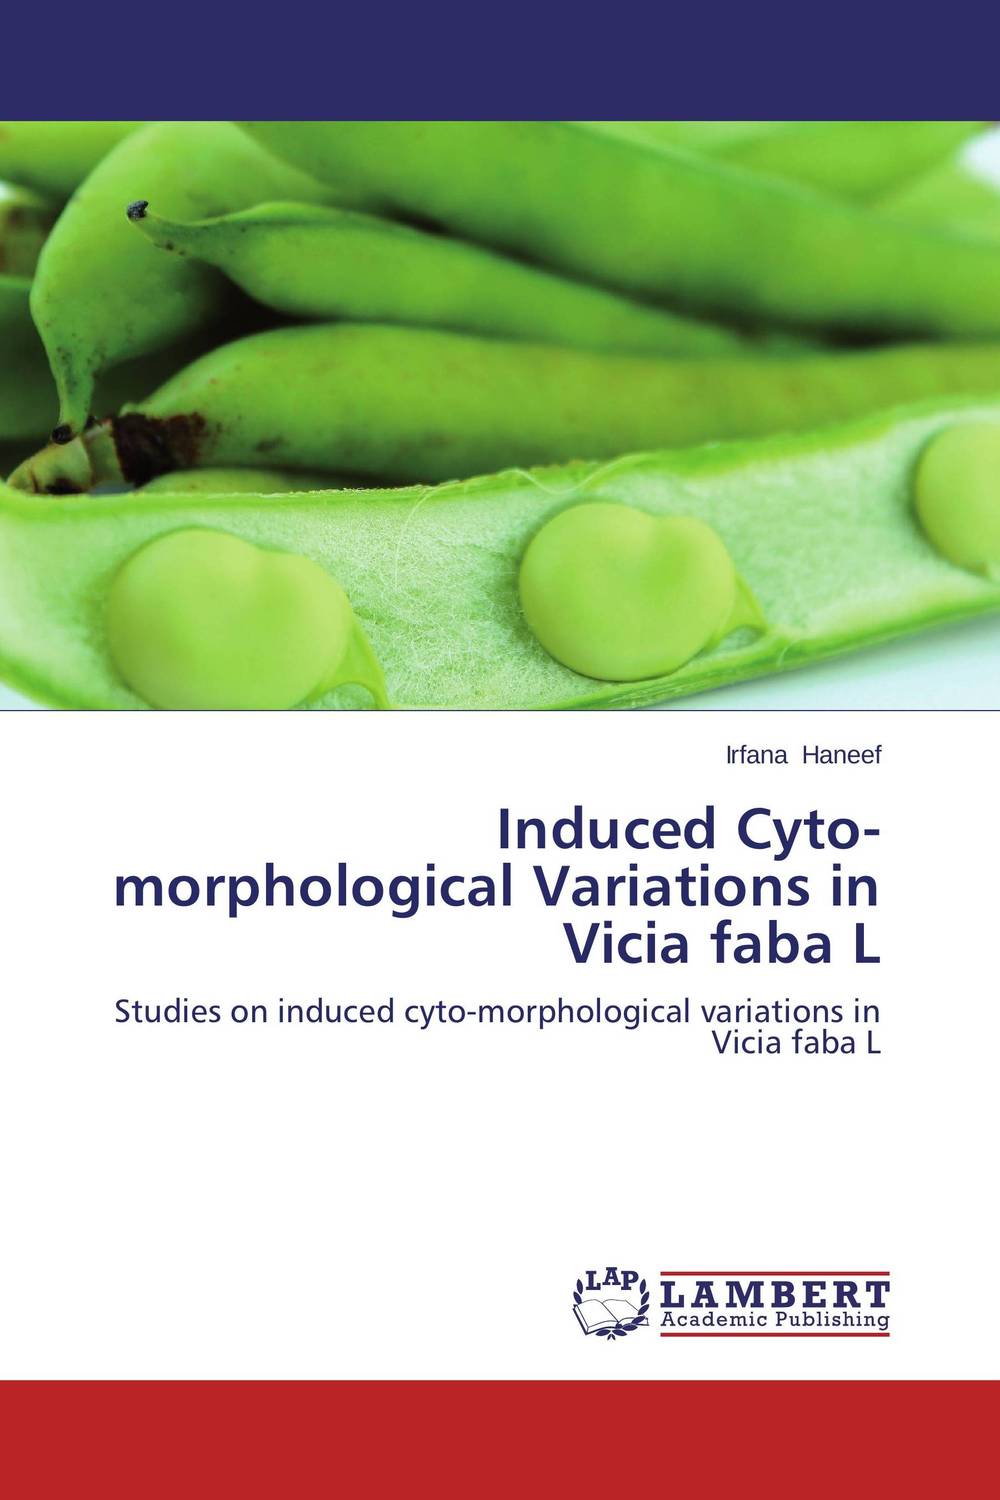 Induced Cyto-morphological Variations in Vicia faba L